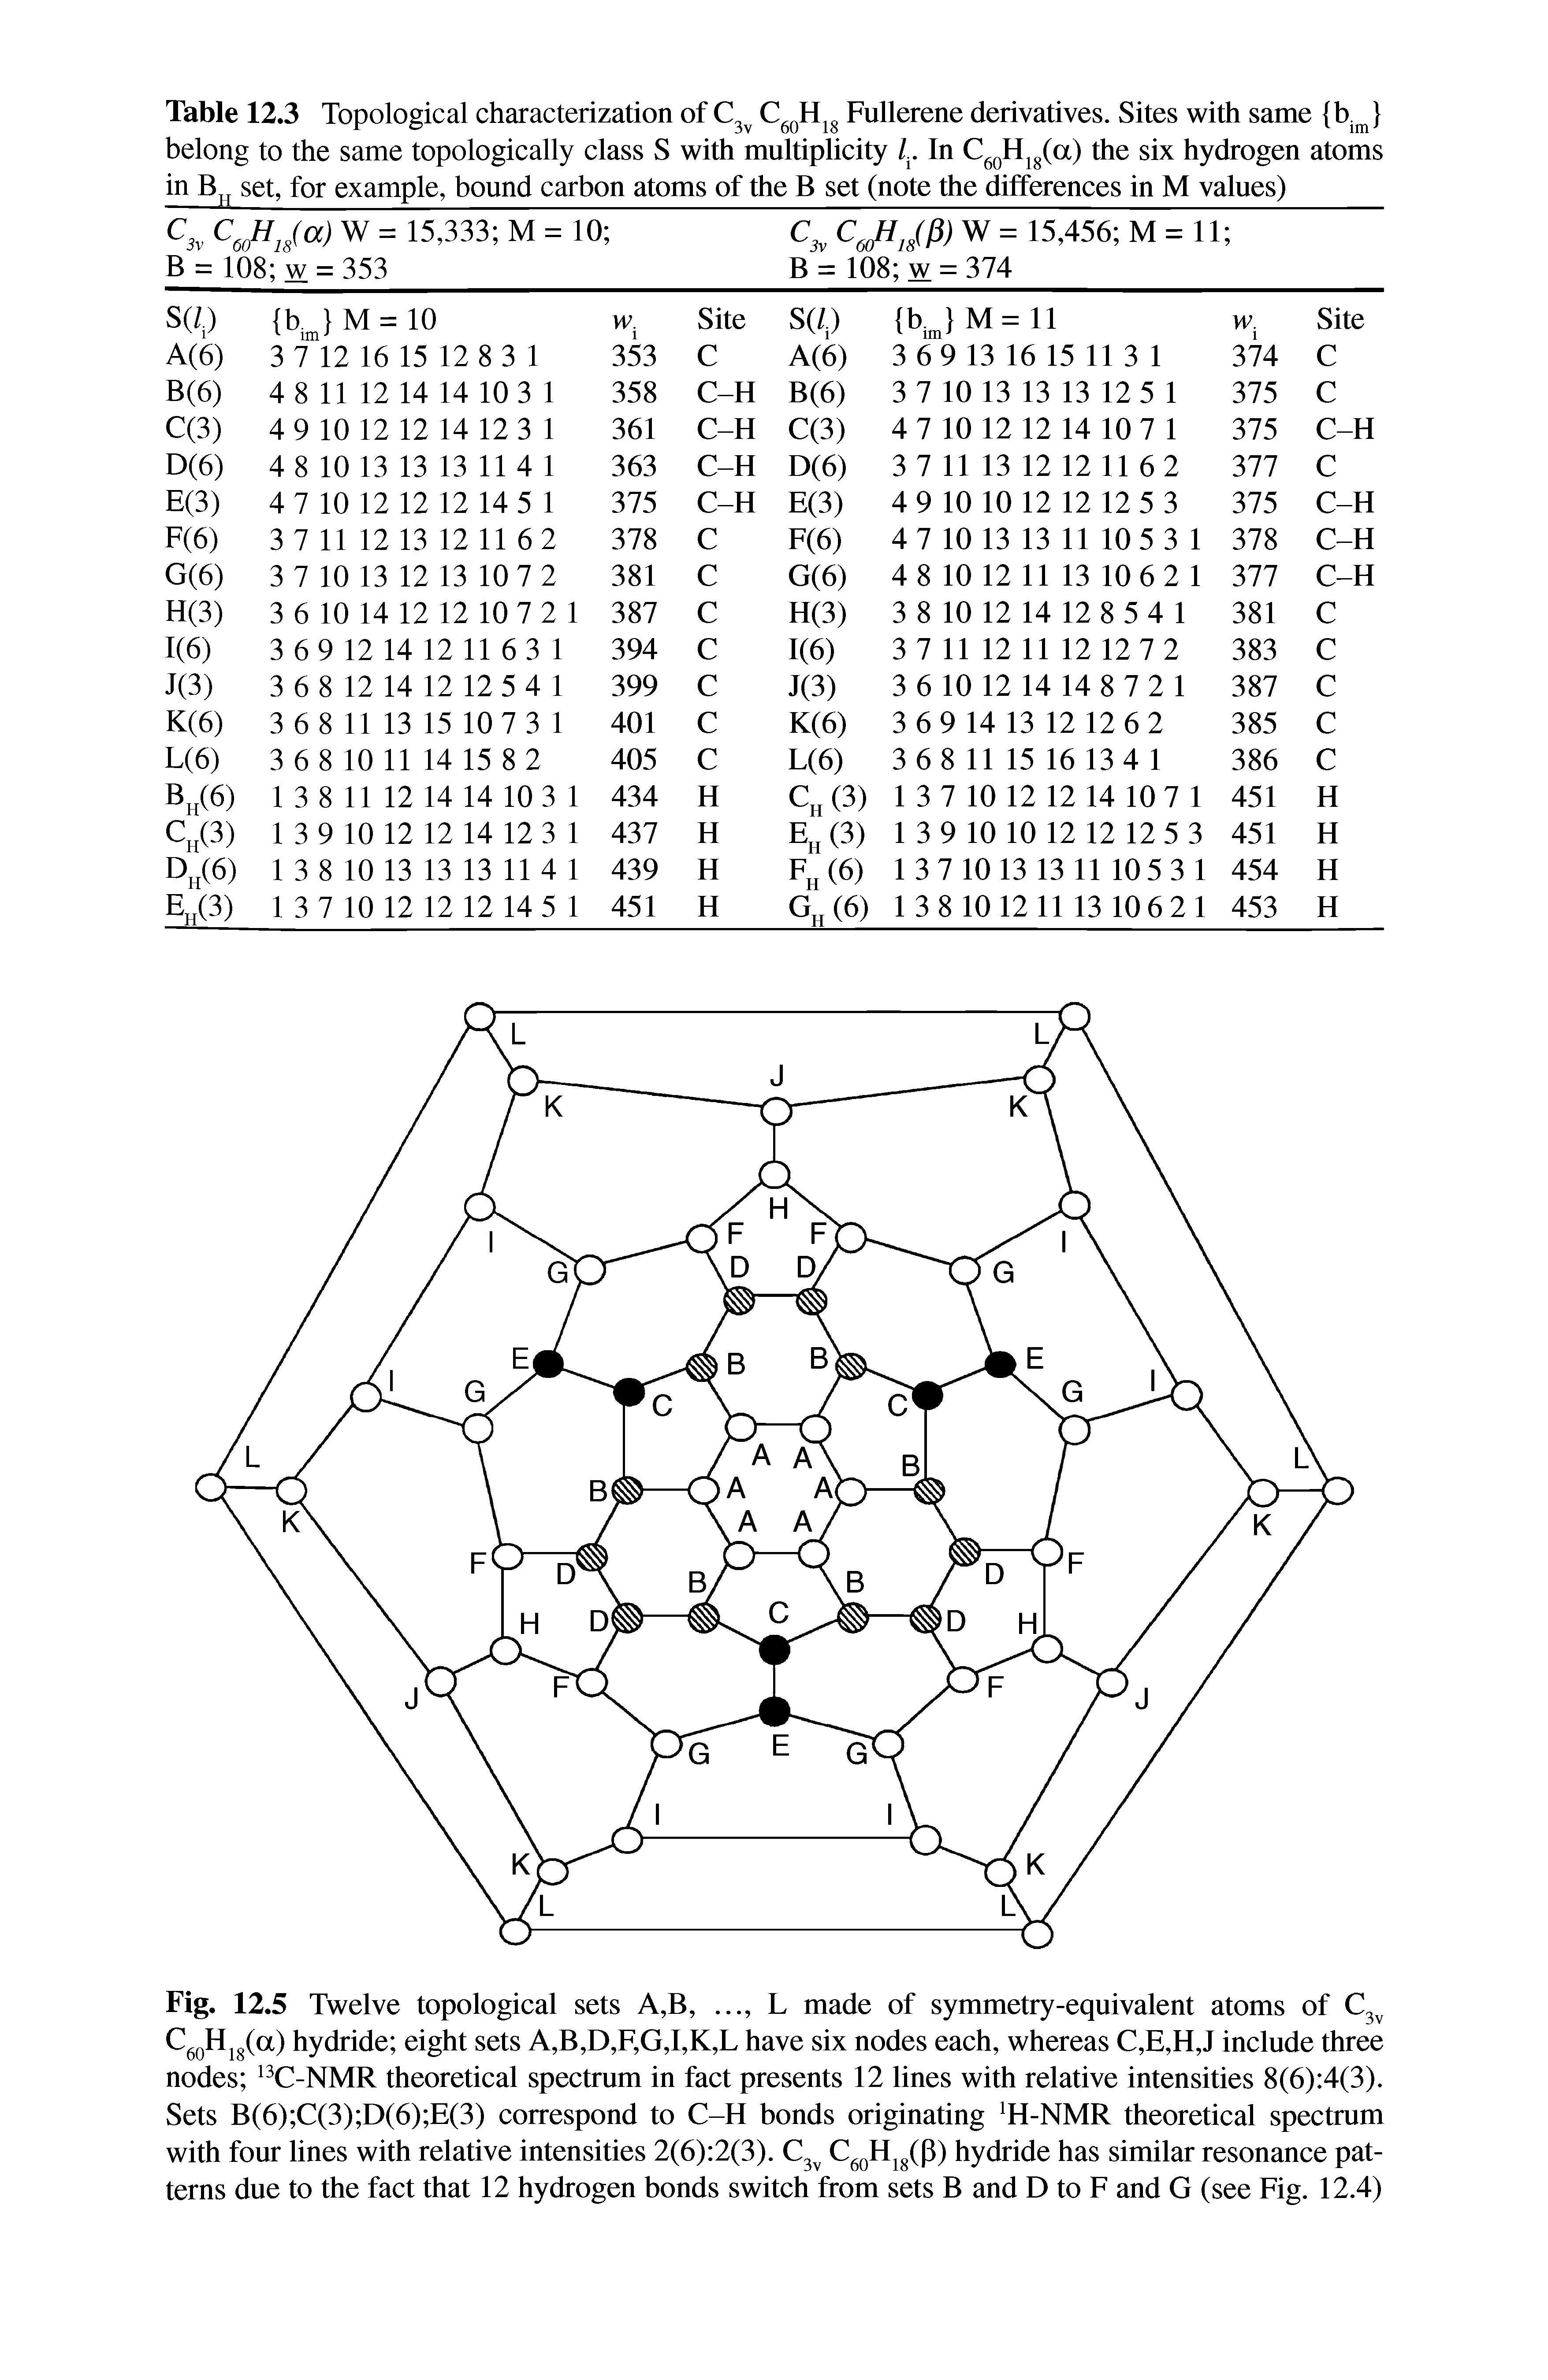 Fig. 12.5 Twelve topological sets A,B, L made of symmetry-equivalent atoms of C3v C6QH18(a) hydride eight sets A,B,D,F,G,I,K,L have sjx no(jes each, whereas C,E,H,J include three nodes 13C-NMR theoretical spectrum in fact presents 12 lines with relative intensities 8(6) 4(3). Sets B(6) C(3) D(6) E(3) correspond to C-H bonds originating -NMR theoretical spectrum with four lines with relative intensities 2(6) 2(3). C3v C60H18(P) hydride has similar resonance patterns due to the fact that 12 hydrogen bonds switch from sets B and D to F and G (see Fig. 12.4)...